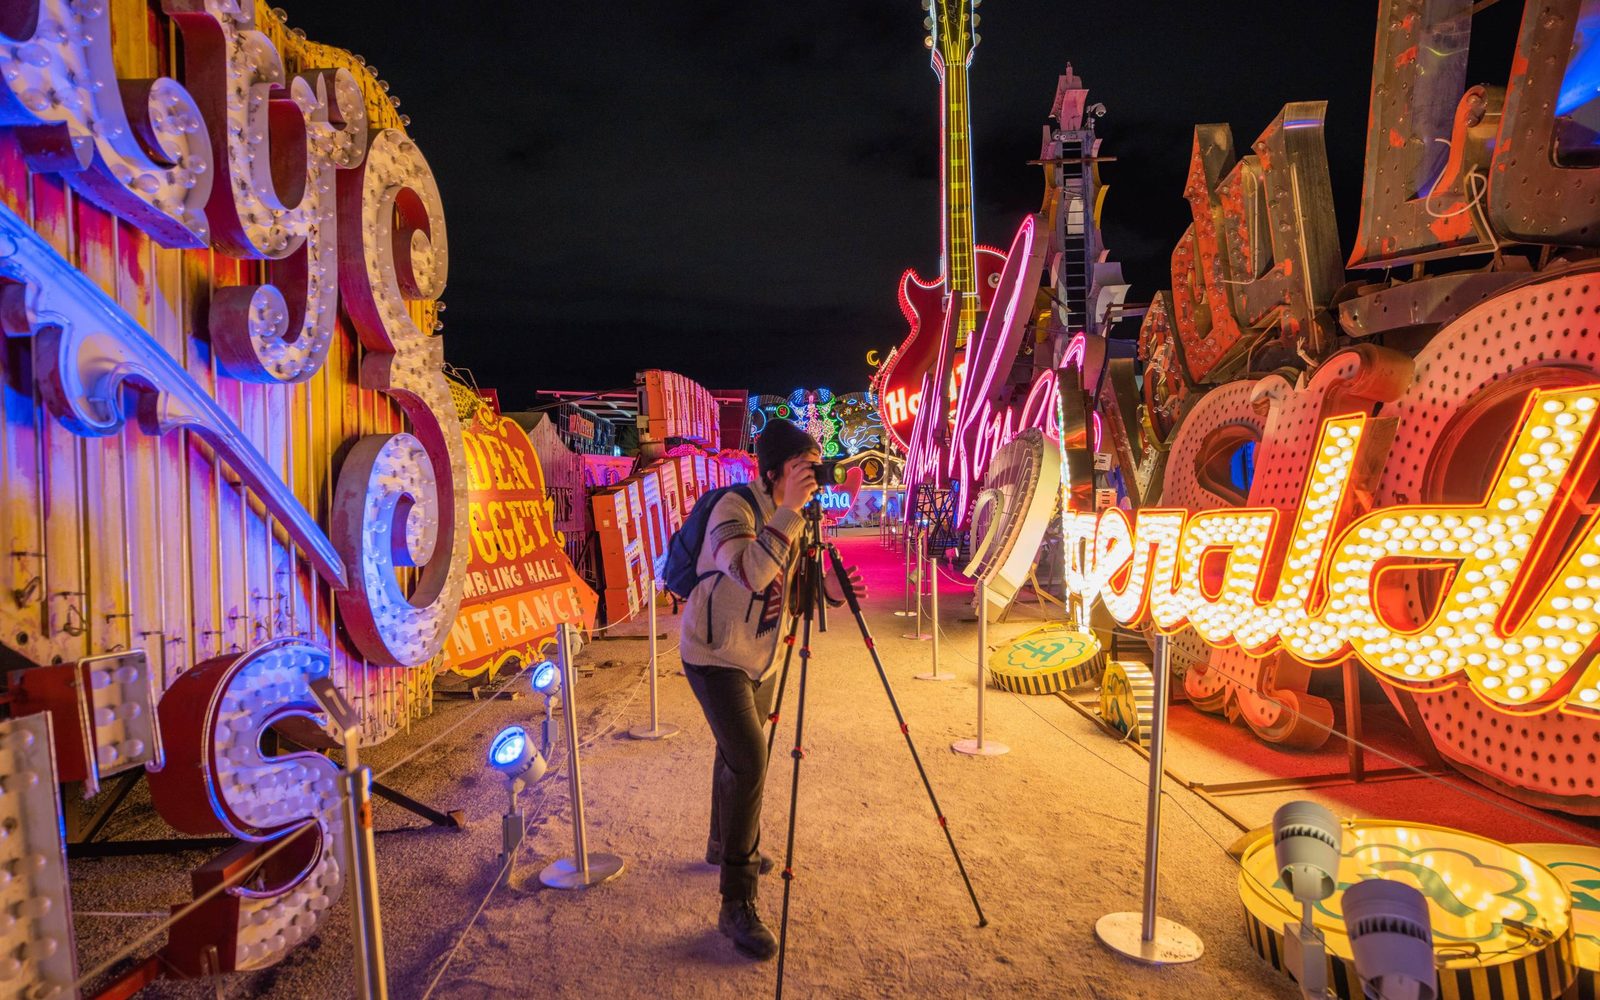 Visitor taking a picture of the Fitzgerald sign at The Neon Museum's Neon Boneyard.